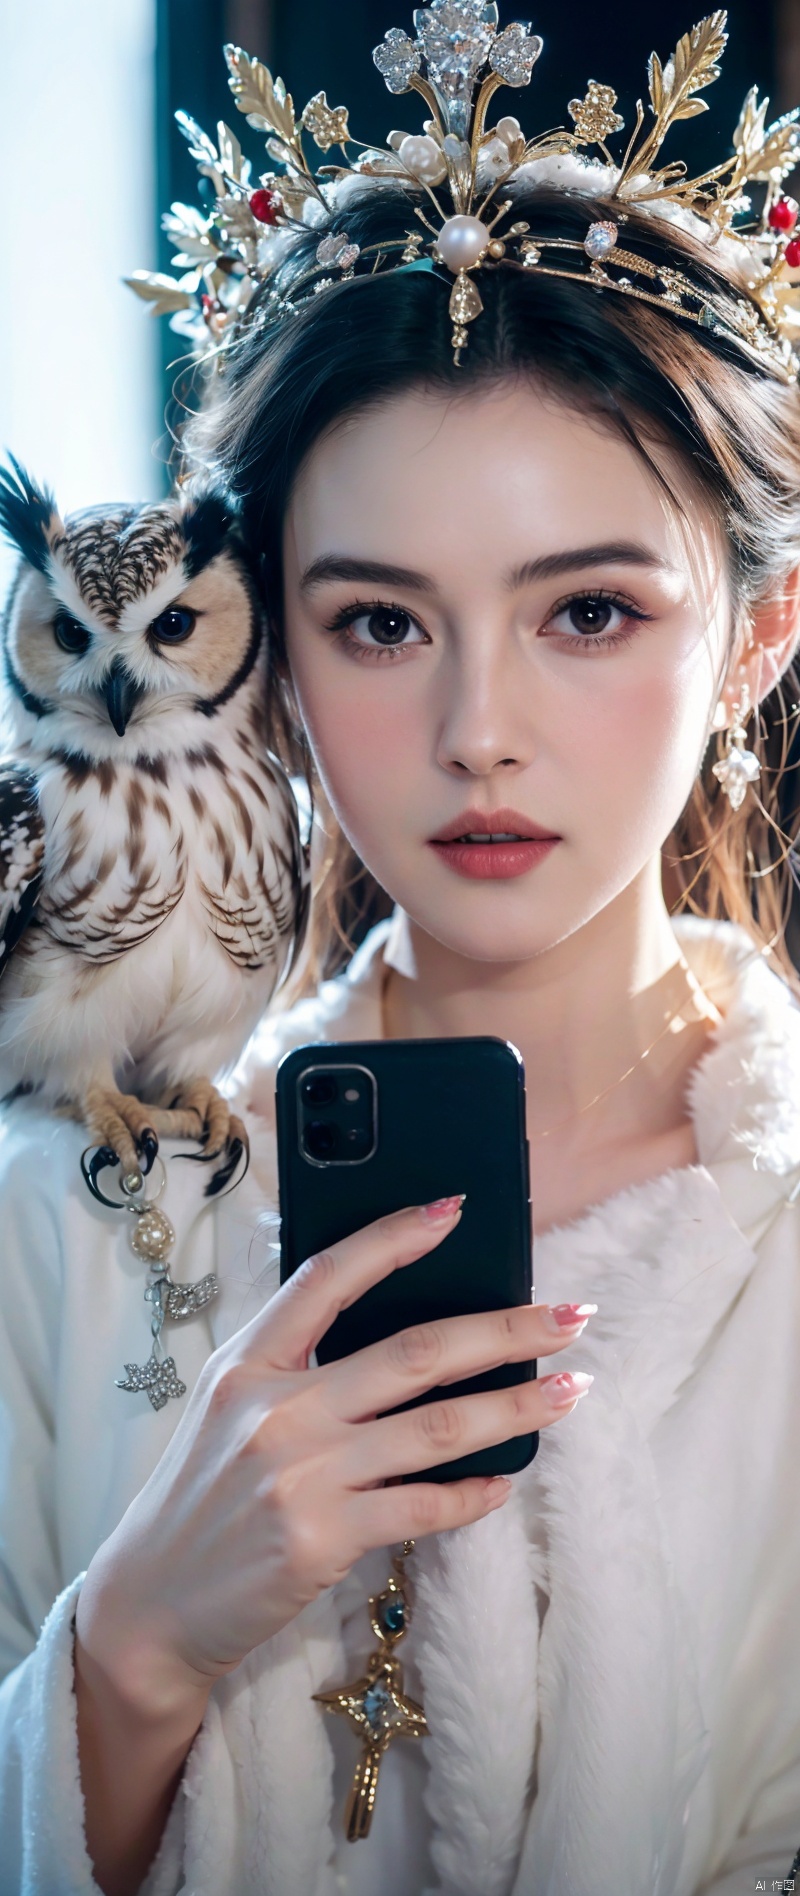 a close up of a person holding a owl on a cell phone, pale snow white skin, white witch, anna nikonova aka newmilky, with an owl on her shoulder, winter princess, 4k hd. snow white hair, beautiful animal pearl queen, karol bak of emma watson nun, owl crown, queen of winter, owl princess with crown, molika